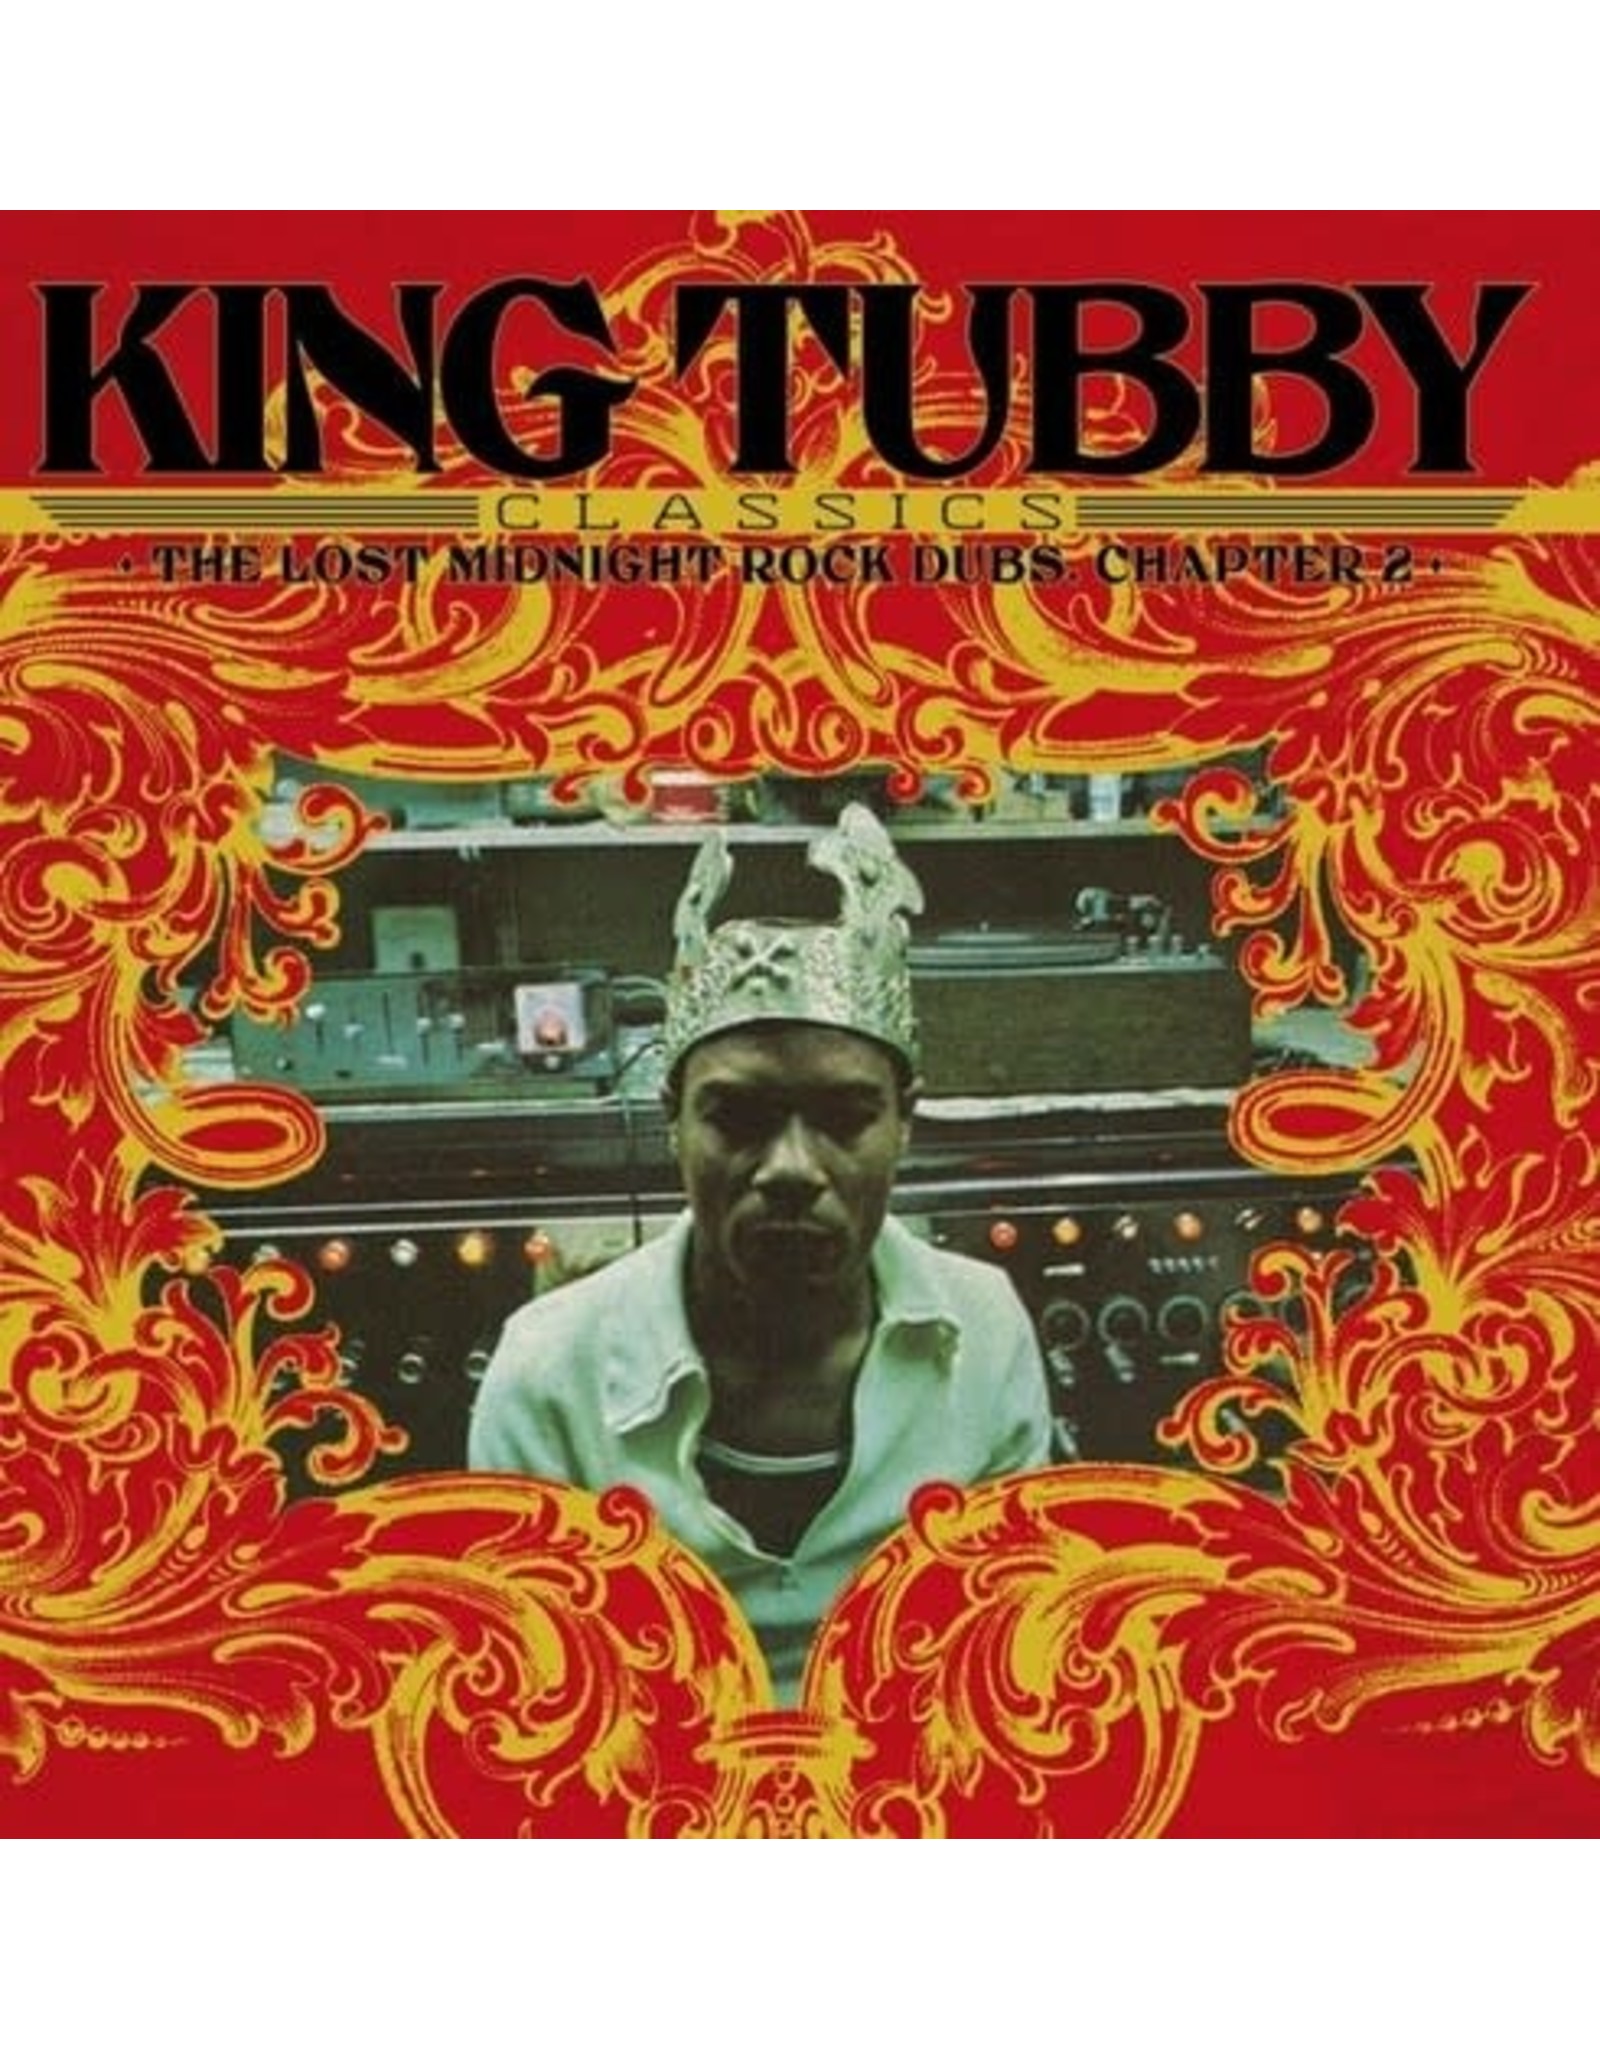 New Vinyl King Tubby - Classics: Lost Midnight Rock Dubs Chapter 2 LP